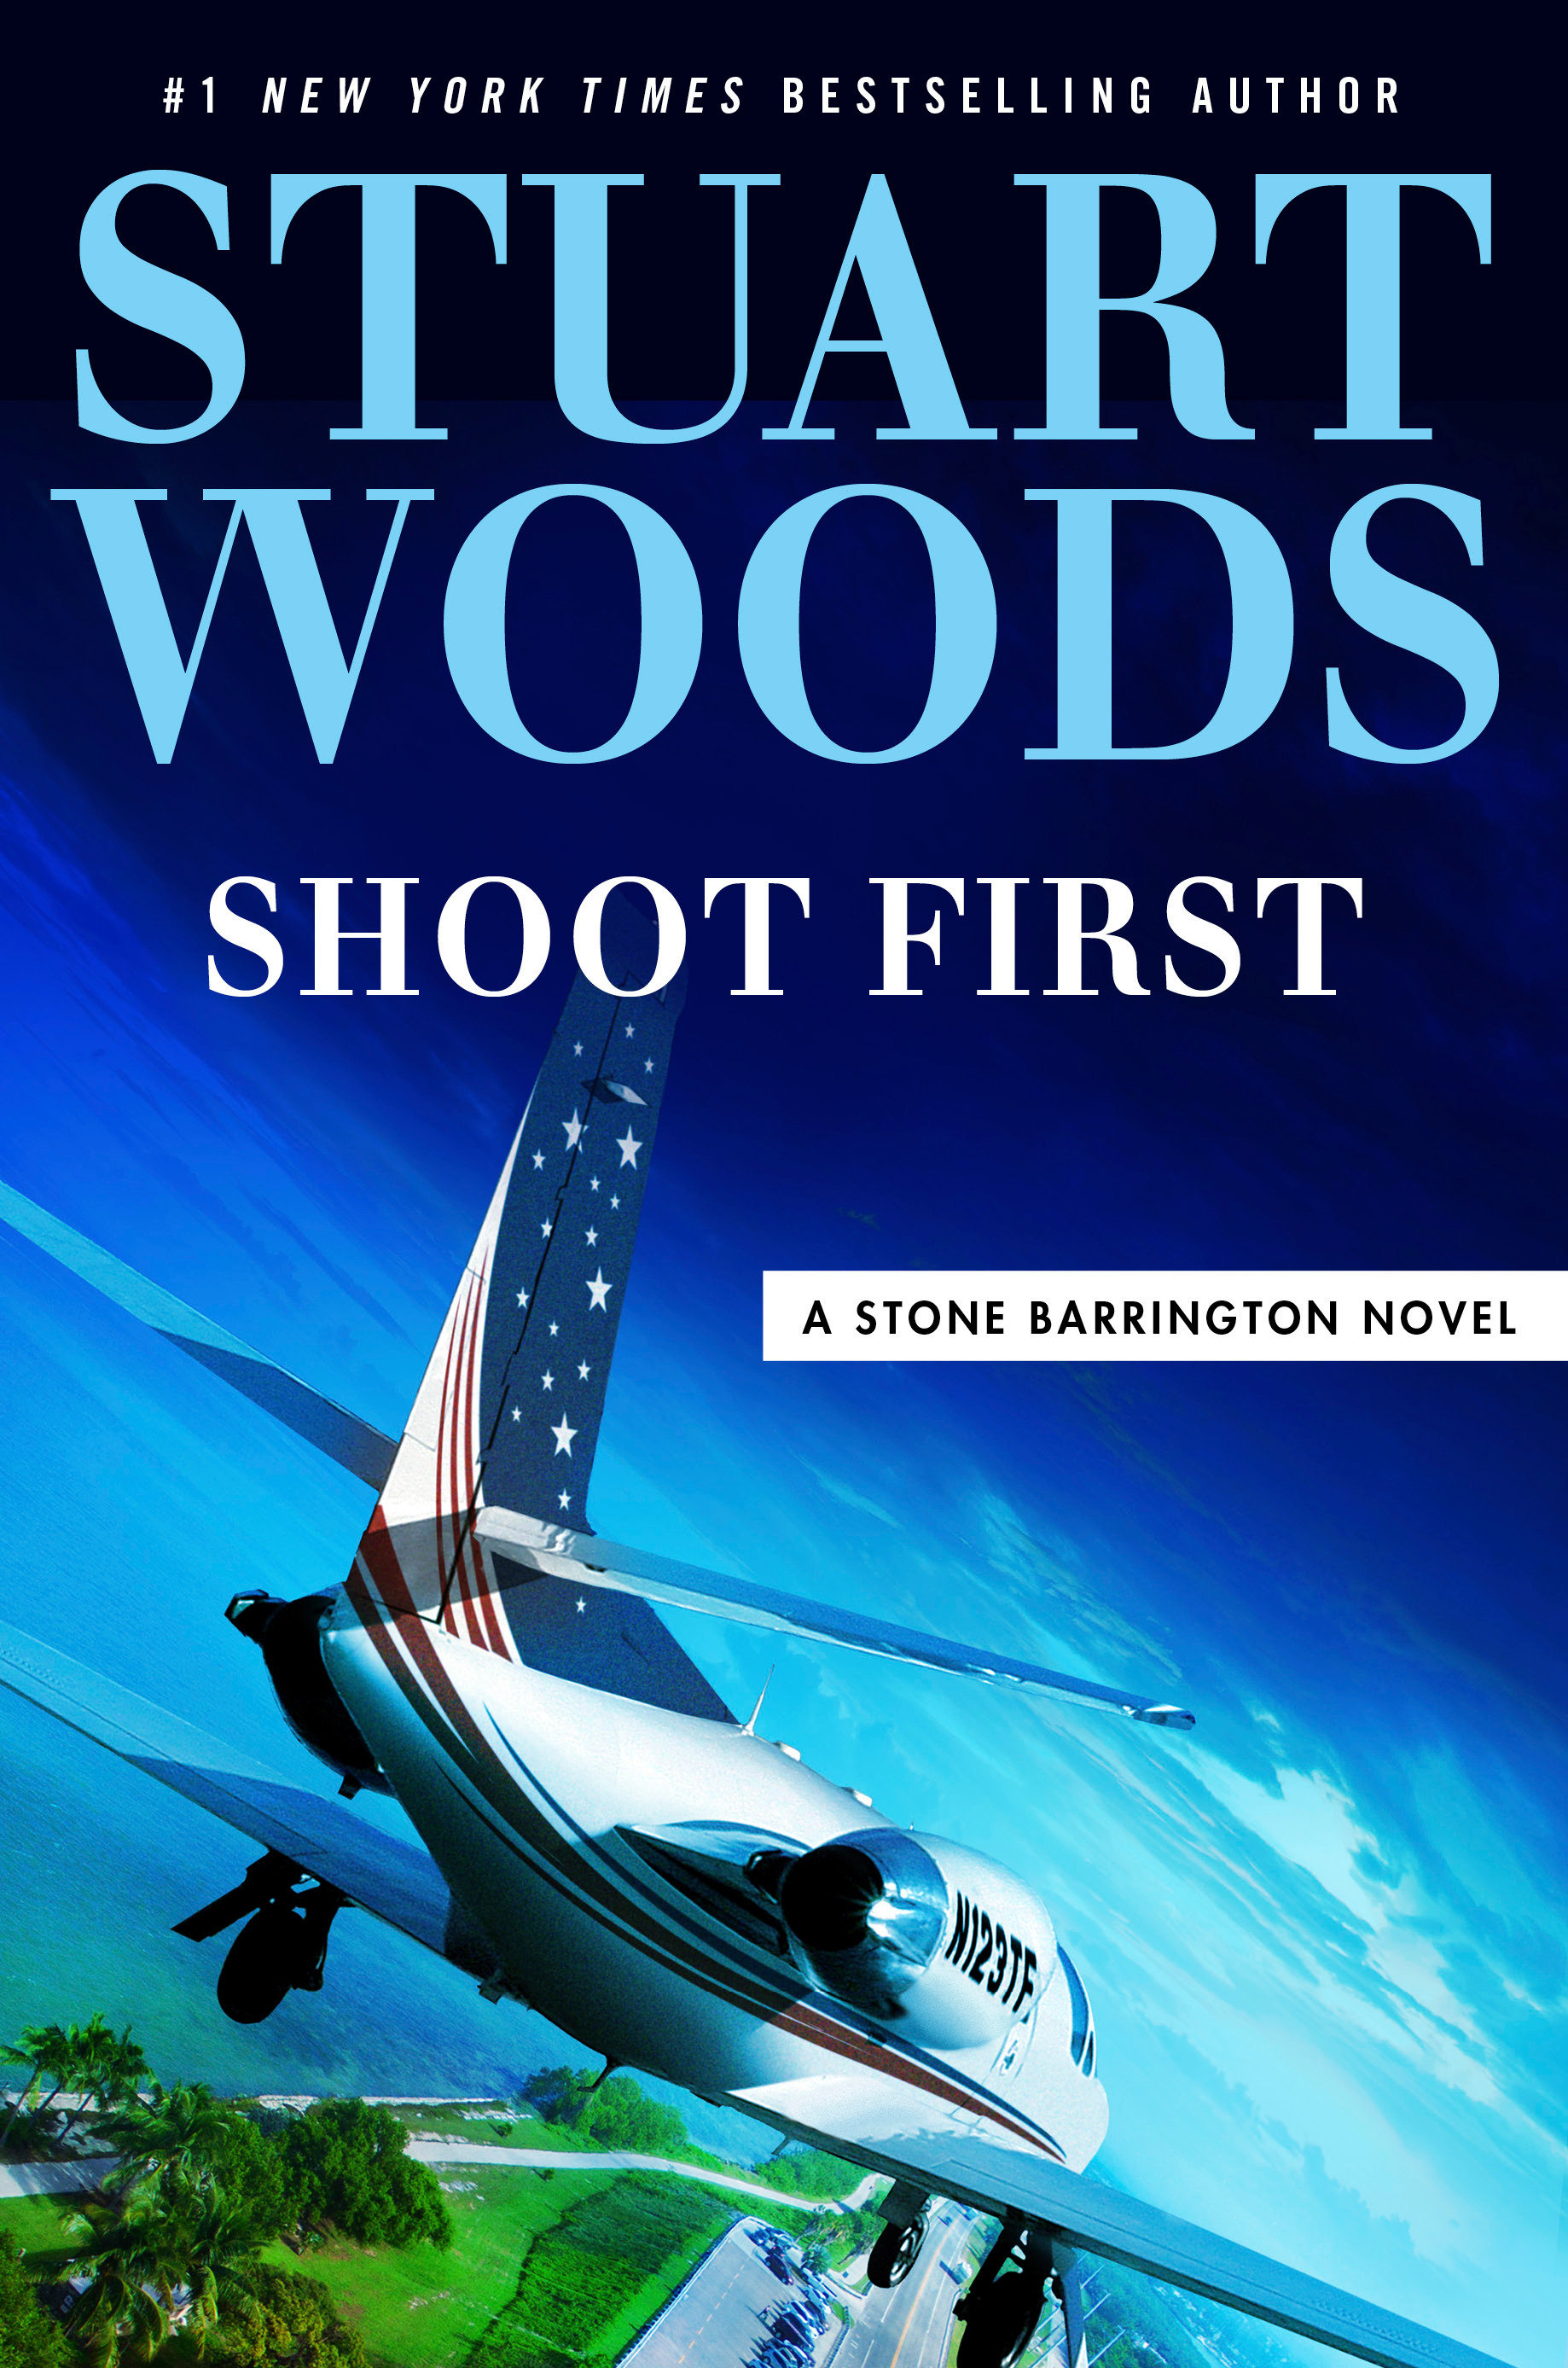 Shoot first (think later) cover image